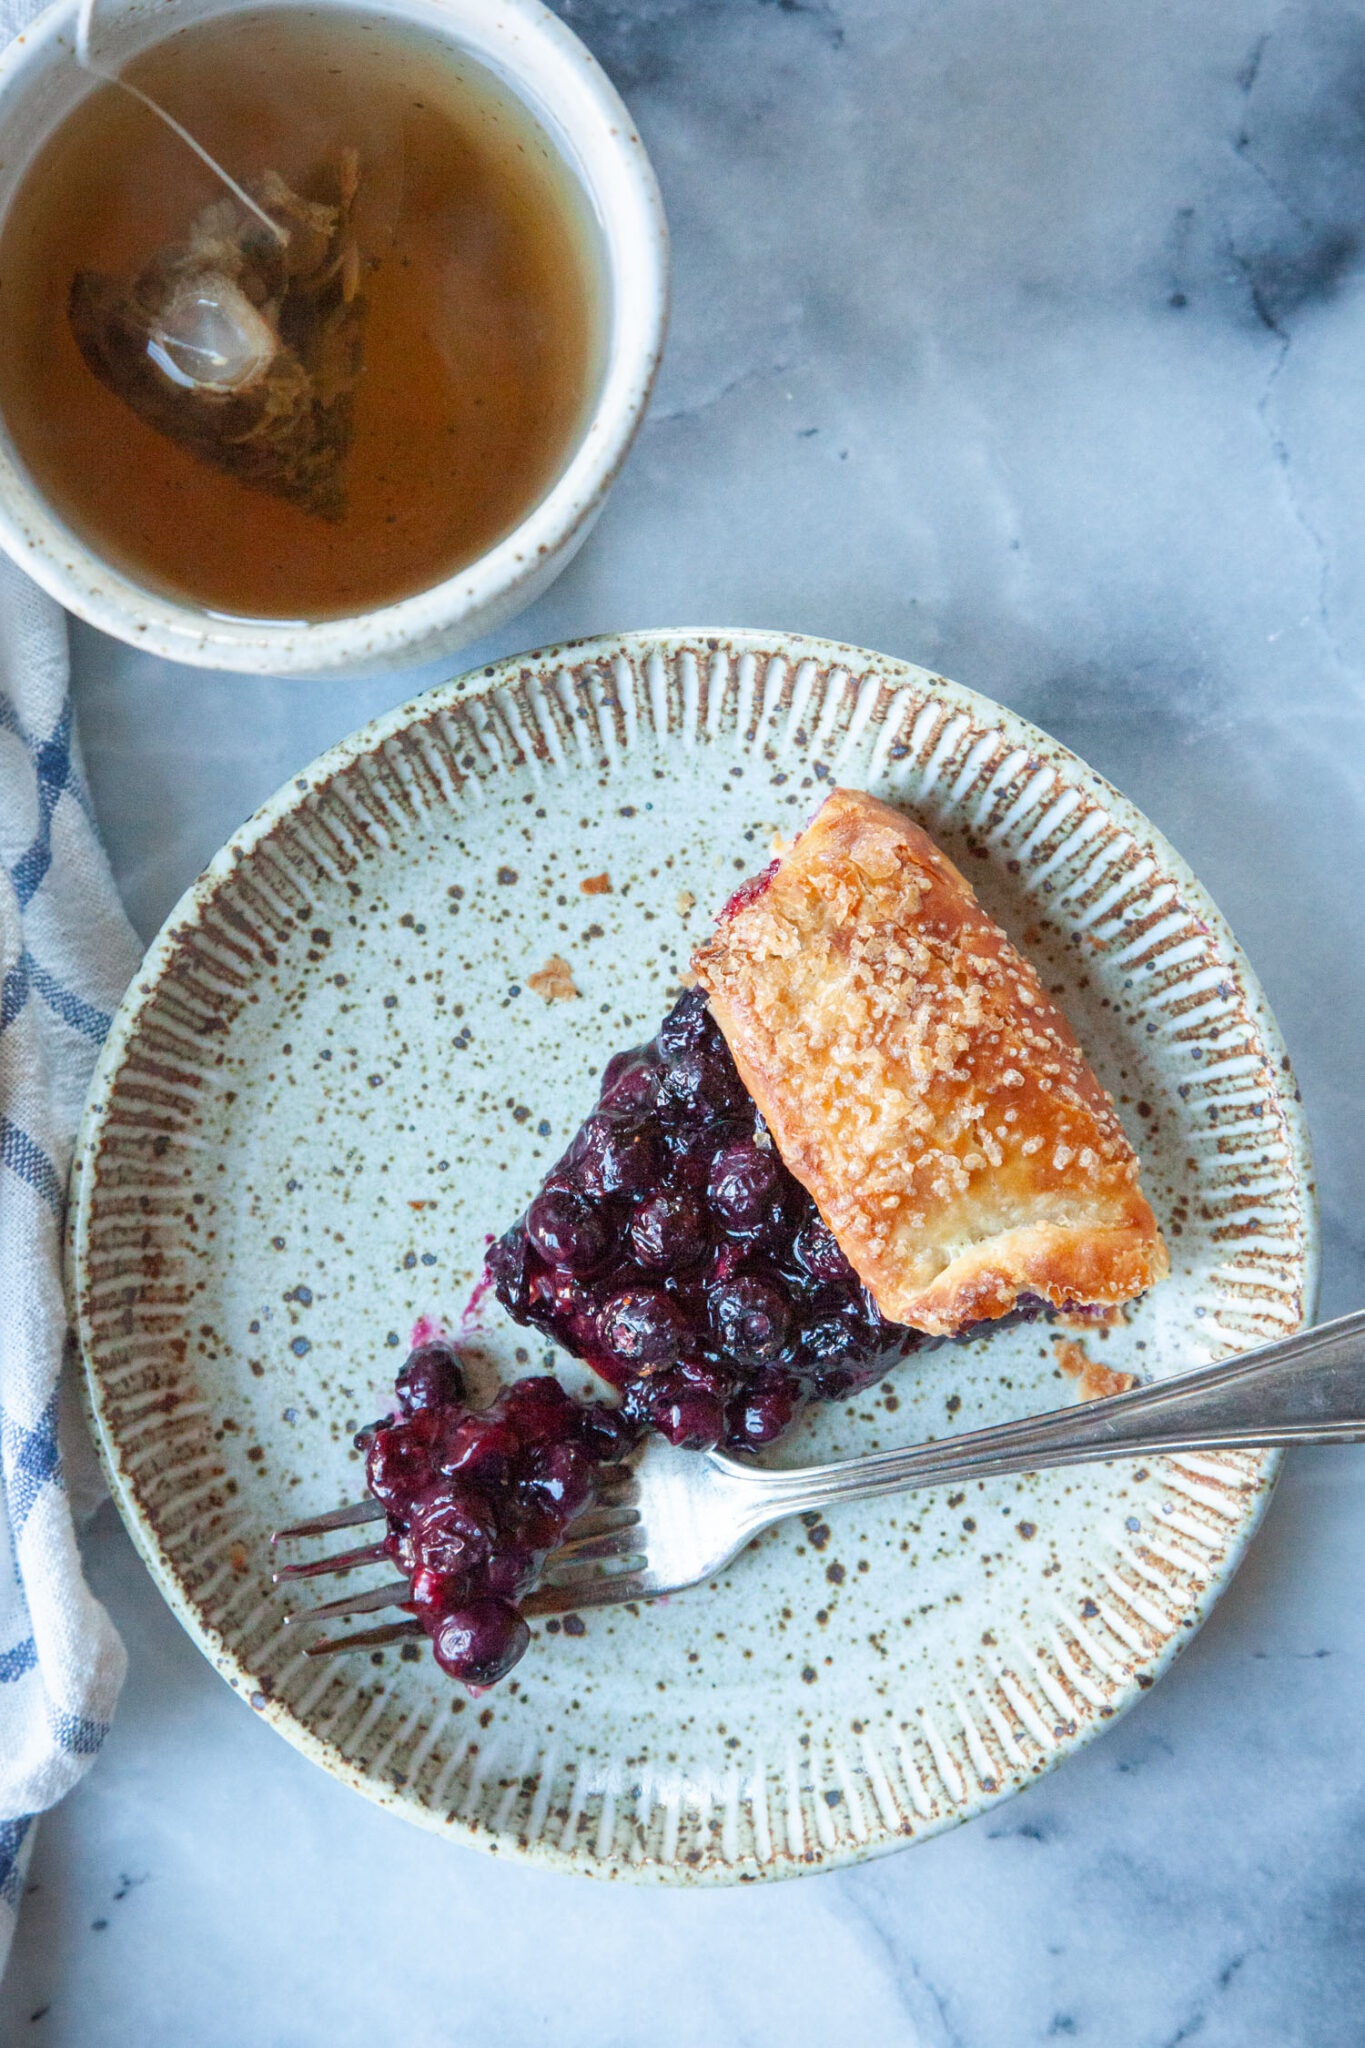 A slice of blueberry galette on a ceramic plate with a fork taking a piece out of the slice. There is a mug of tea and a cloth napkin next to the plate.